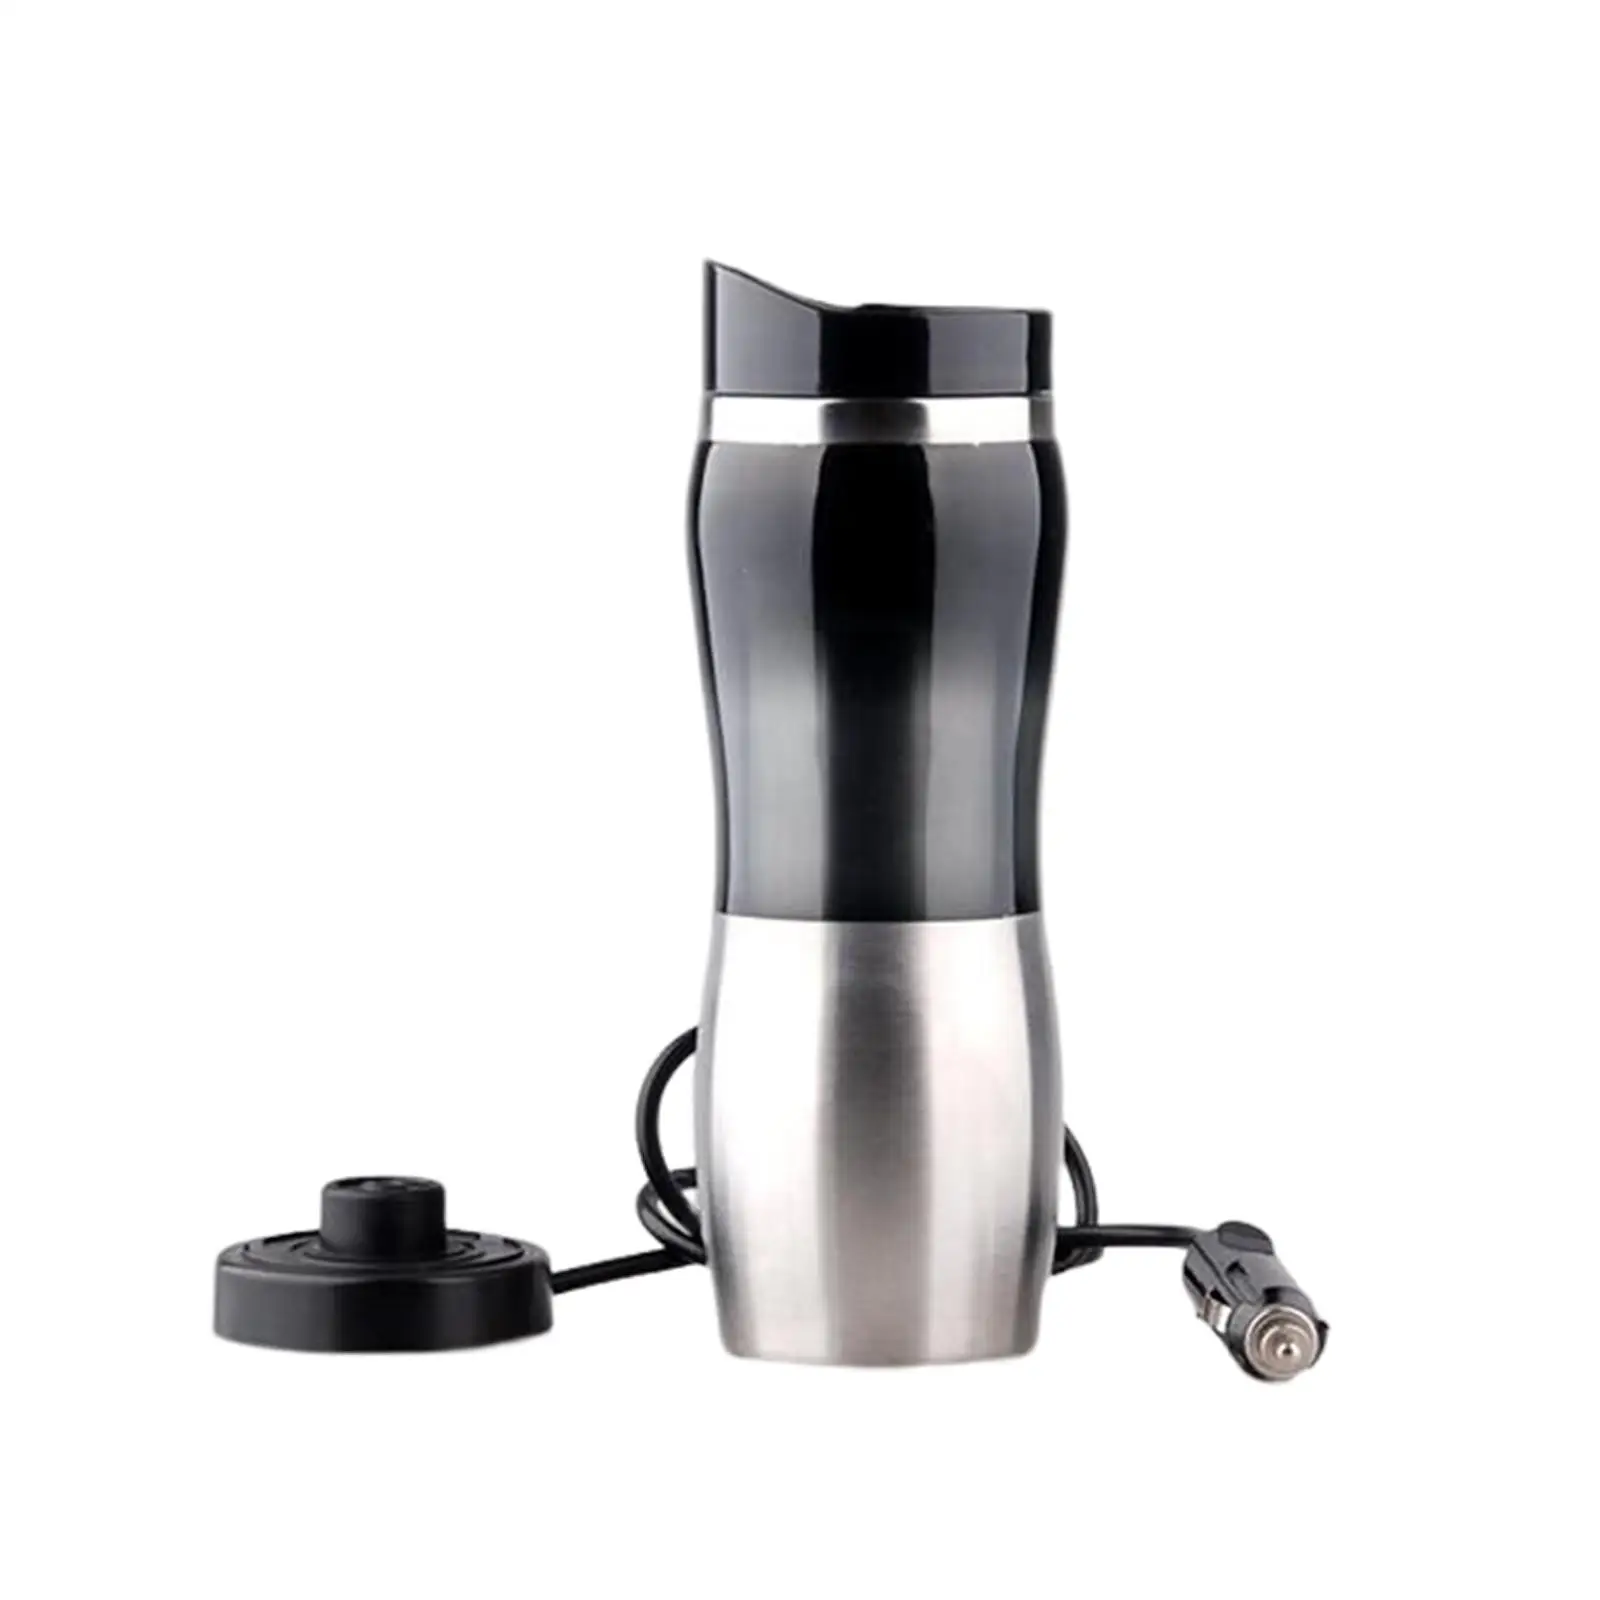 Car Electric Kettle 400ml 12V Stainless Steel Electric in Car Mug Car Water Heater for Travel Milk Hot Water Eggs Camping Boat